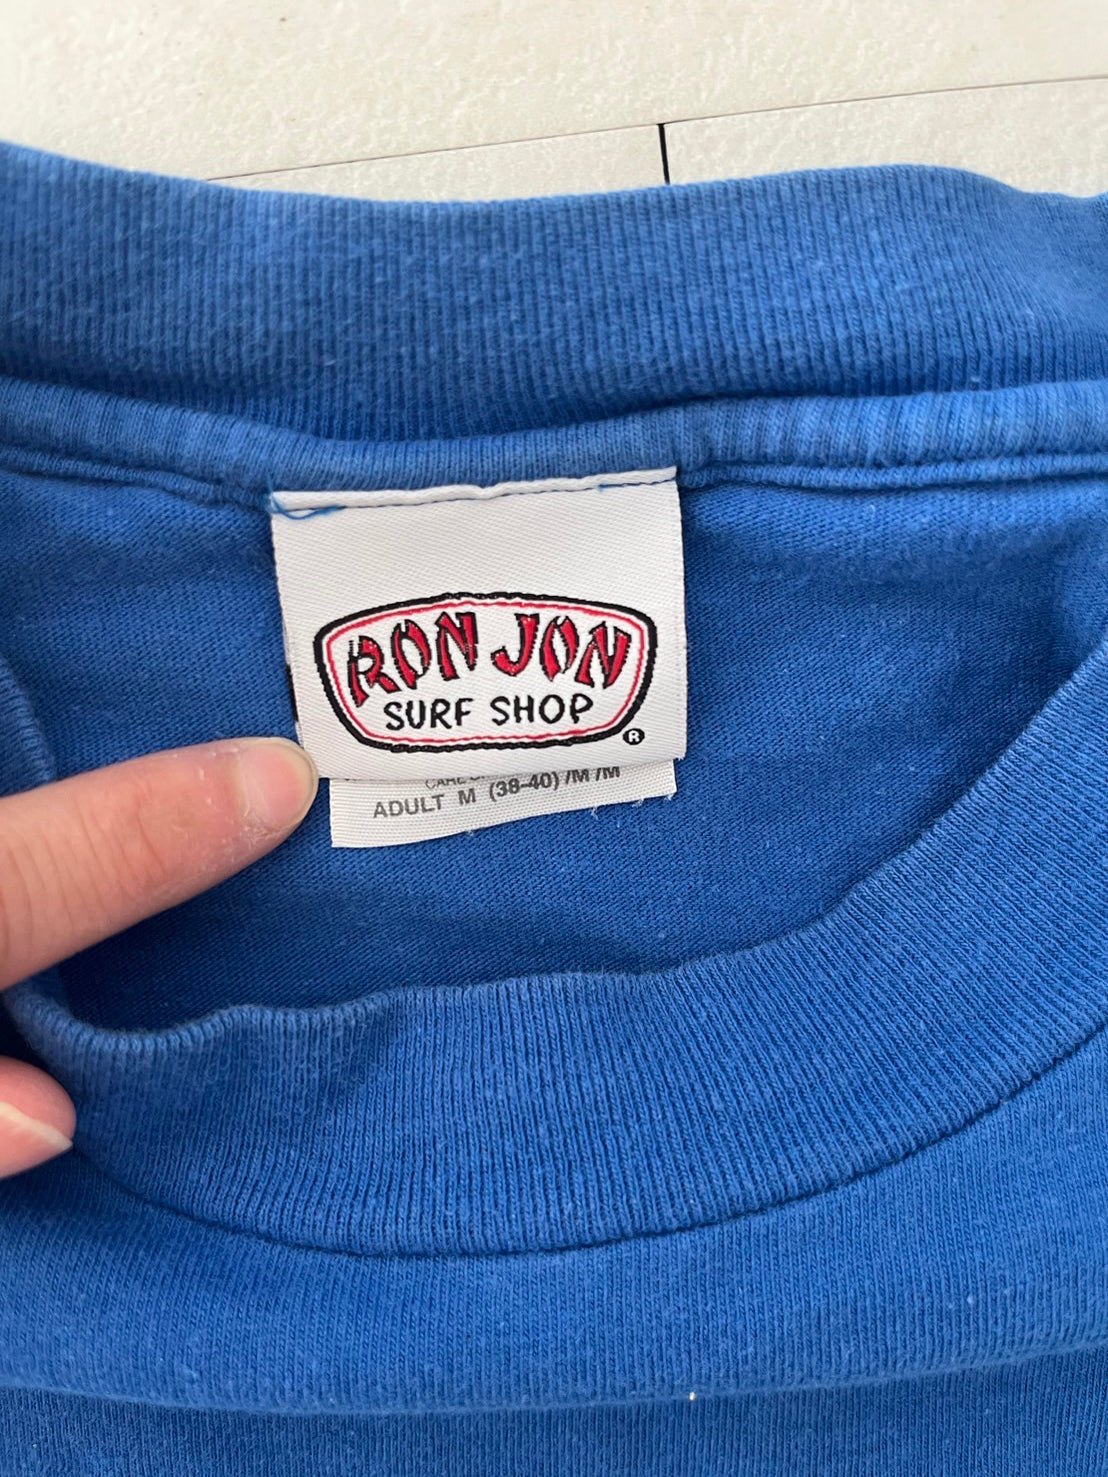 【RON JON】RonJon Surf Shop ONE AND ONLY T-Shirt BLUE  (men's M)